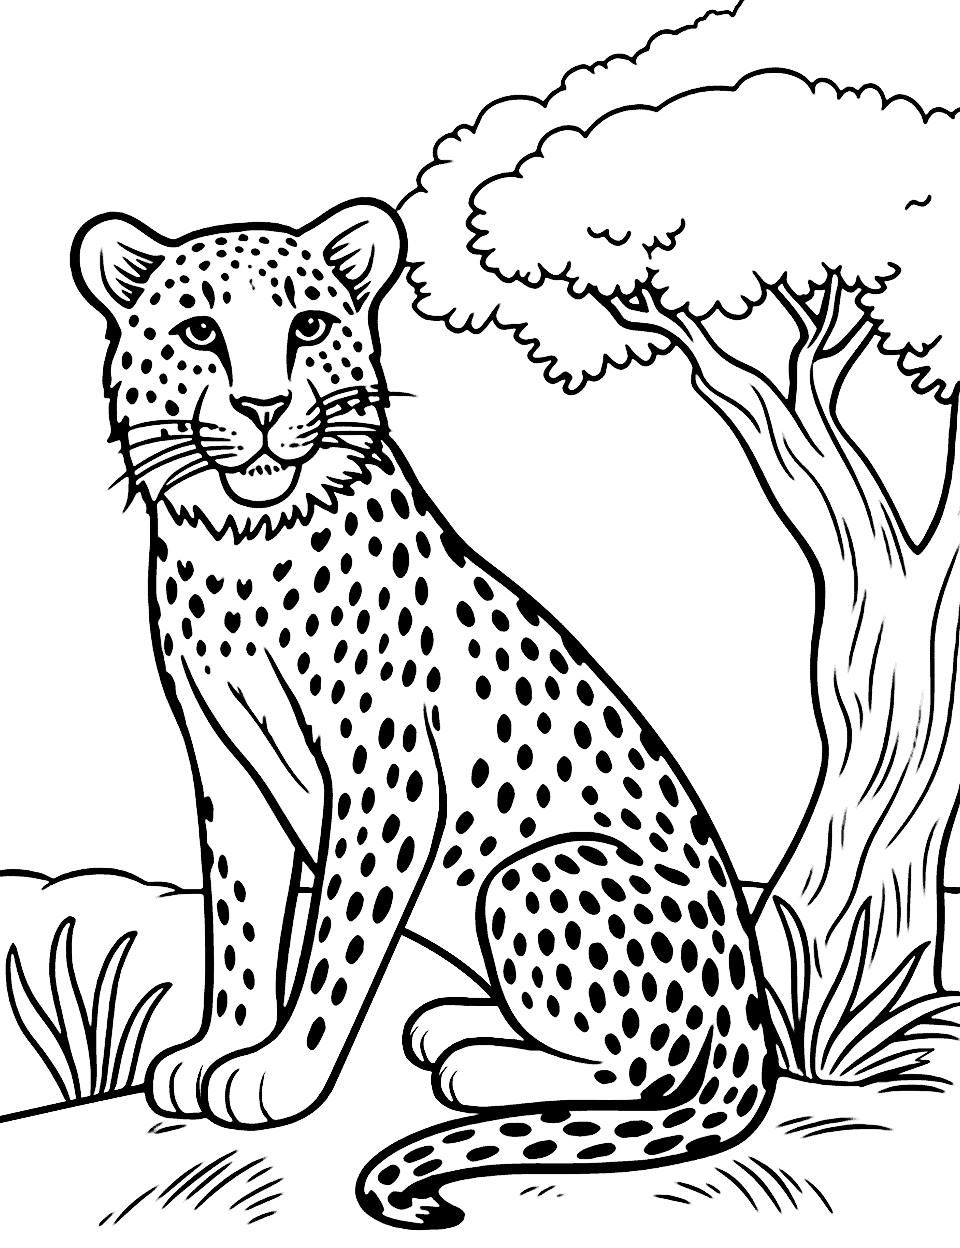 Cheetah Under a Tree Coloring Page - A serene scene of a cheetah resting under a shady tree.